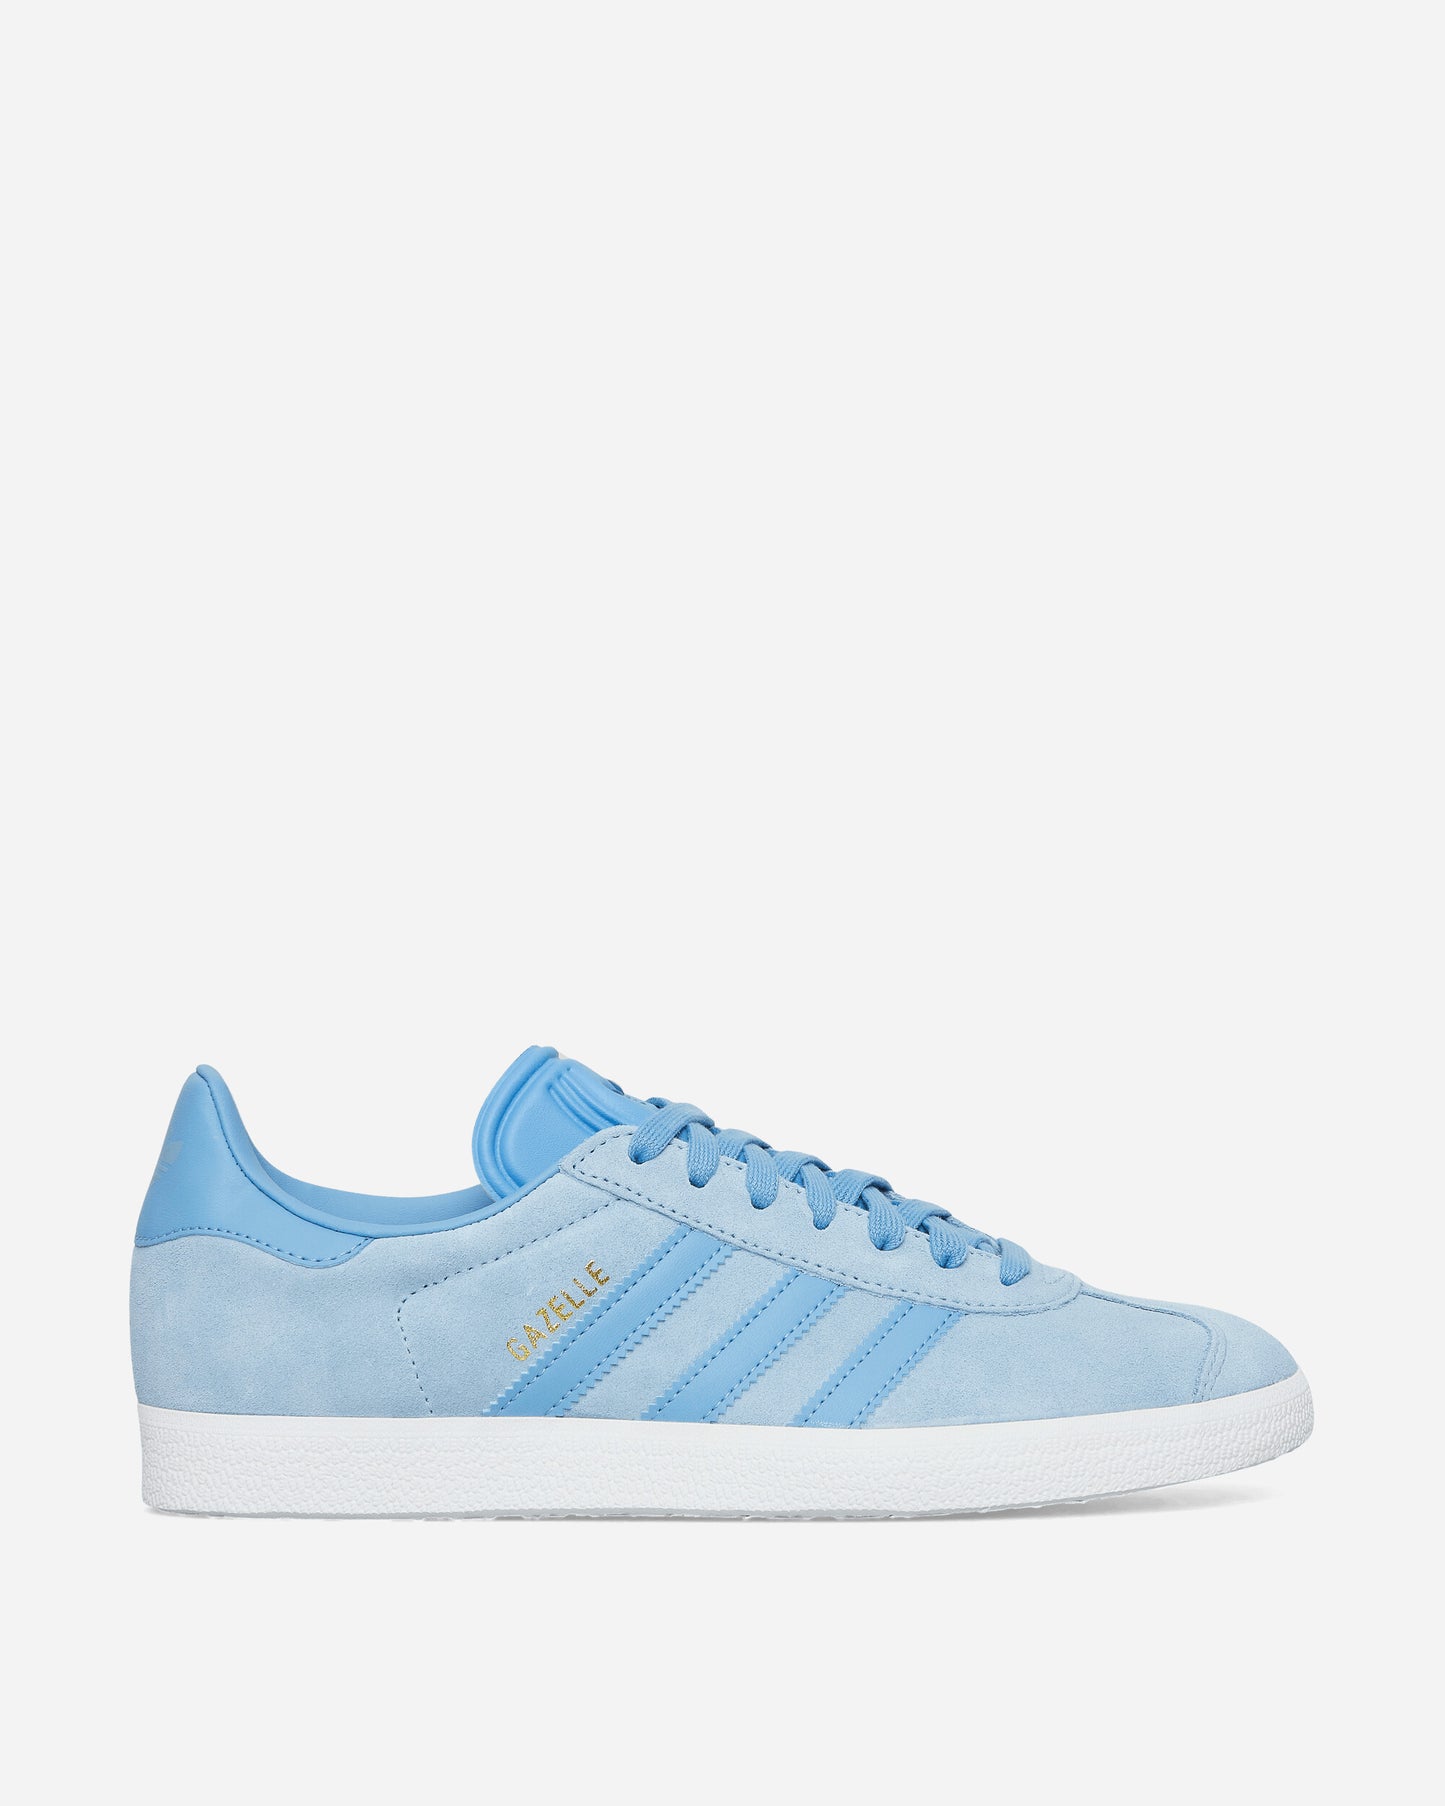 adidas Gazelle Clblue/Ltblue Sneakers Low IG4987 001